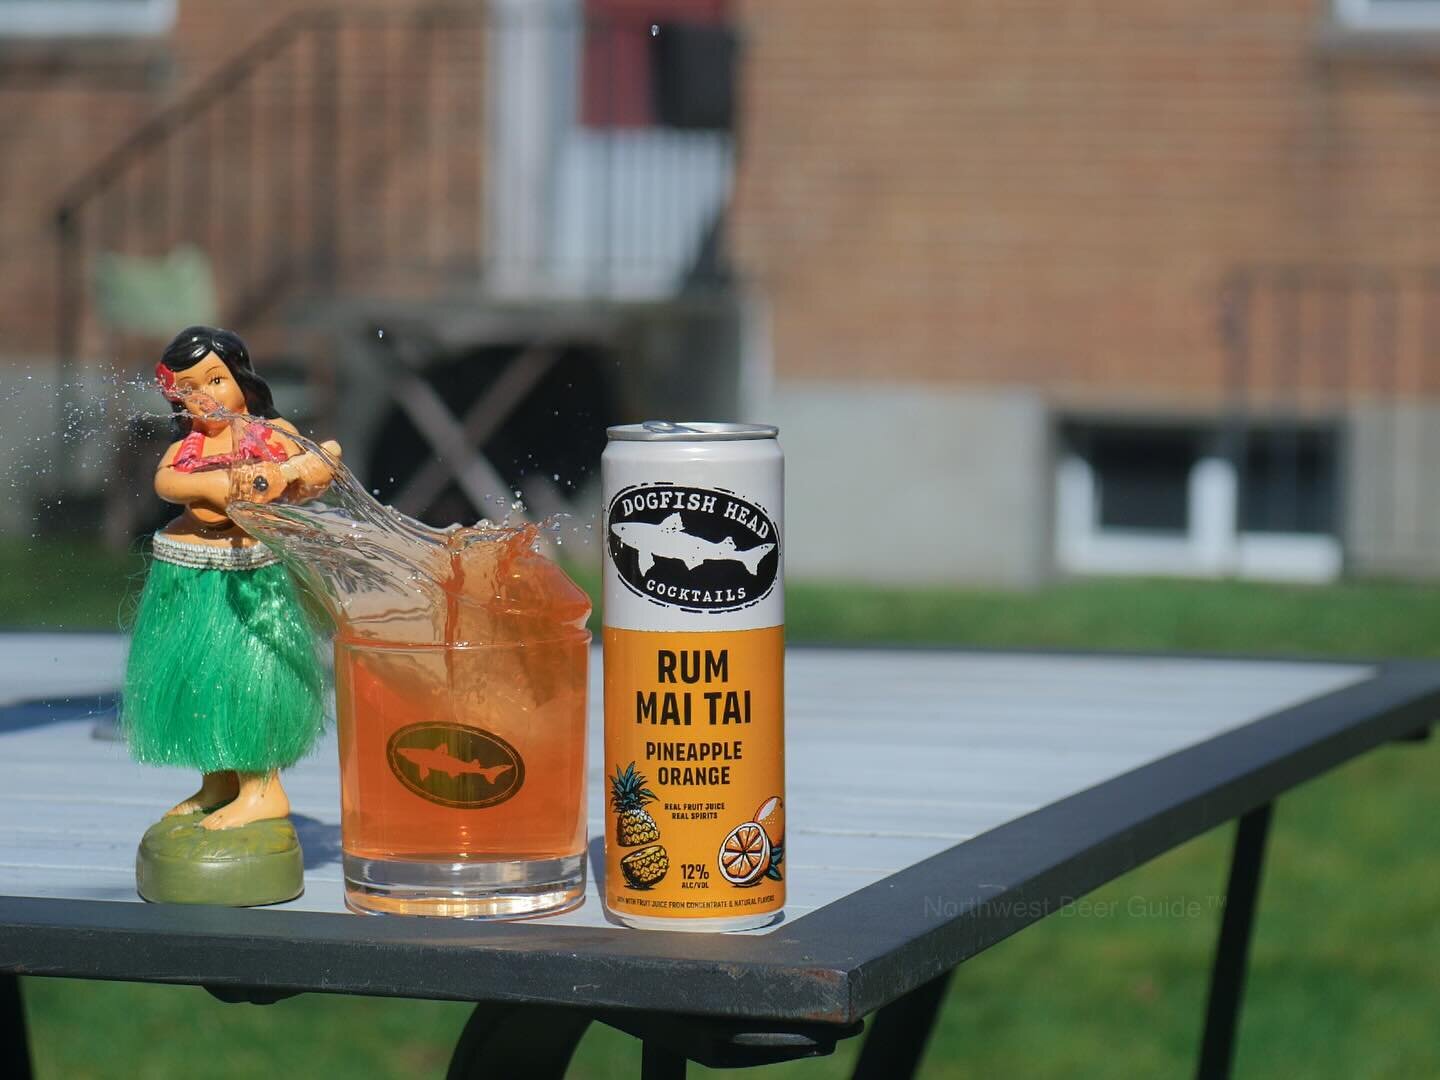 As the temps warm up, and the yard work is calling, we enjoy another new release from @dogfishspirits, Pineapple Orange Rum Mai Tai. The result is their classic Mai Tai with punchy pineapple and tangy oranges.
.
.
.
Following this we tried another ta